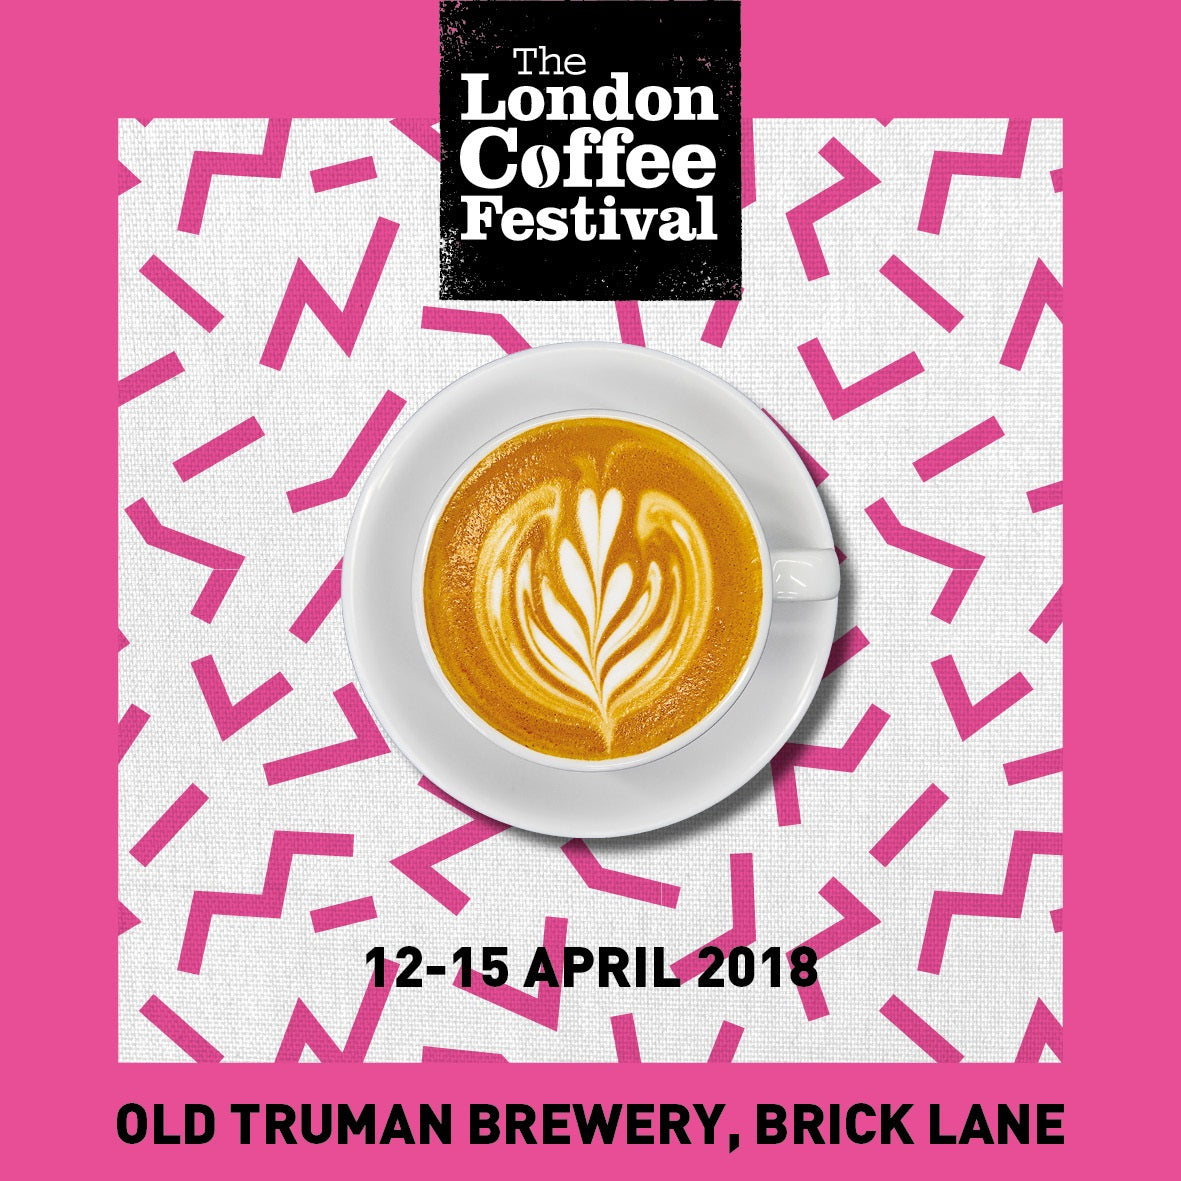 We will be at the London Coffee Festival again